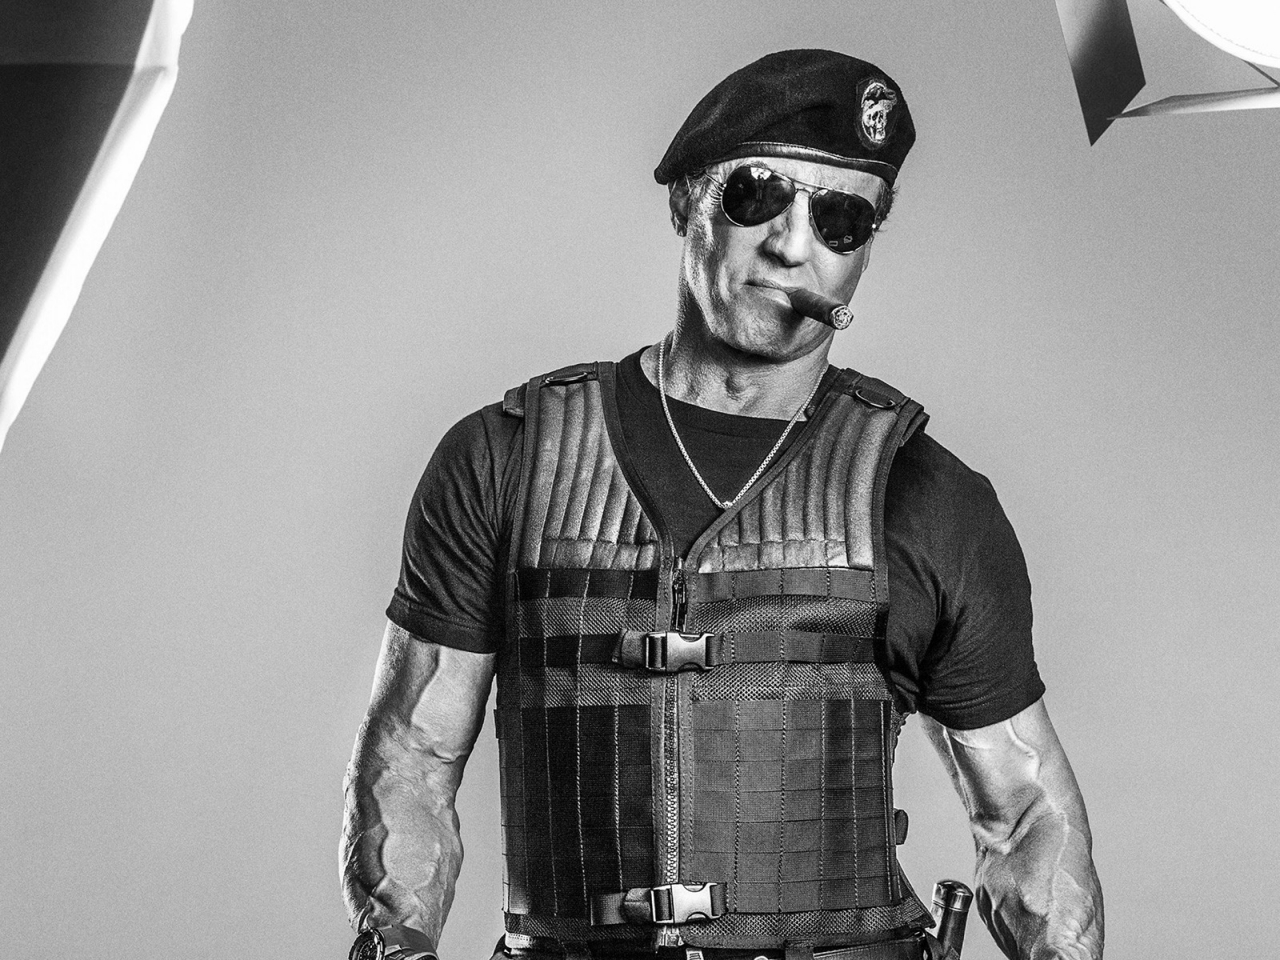 Sylvester Stallone The Expendables 3 for 1280 x 960 resolution